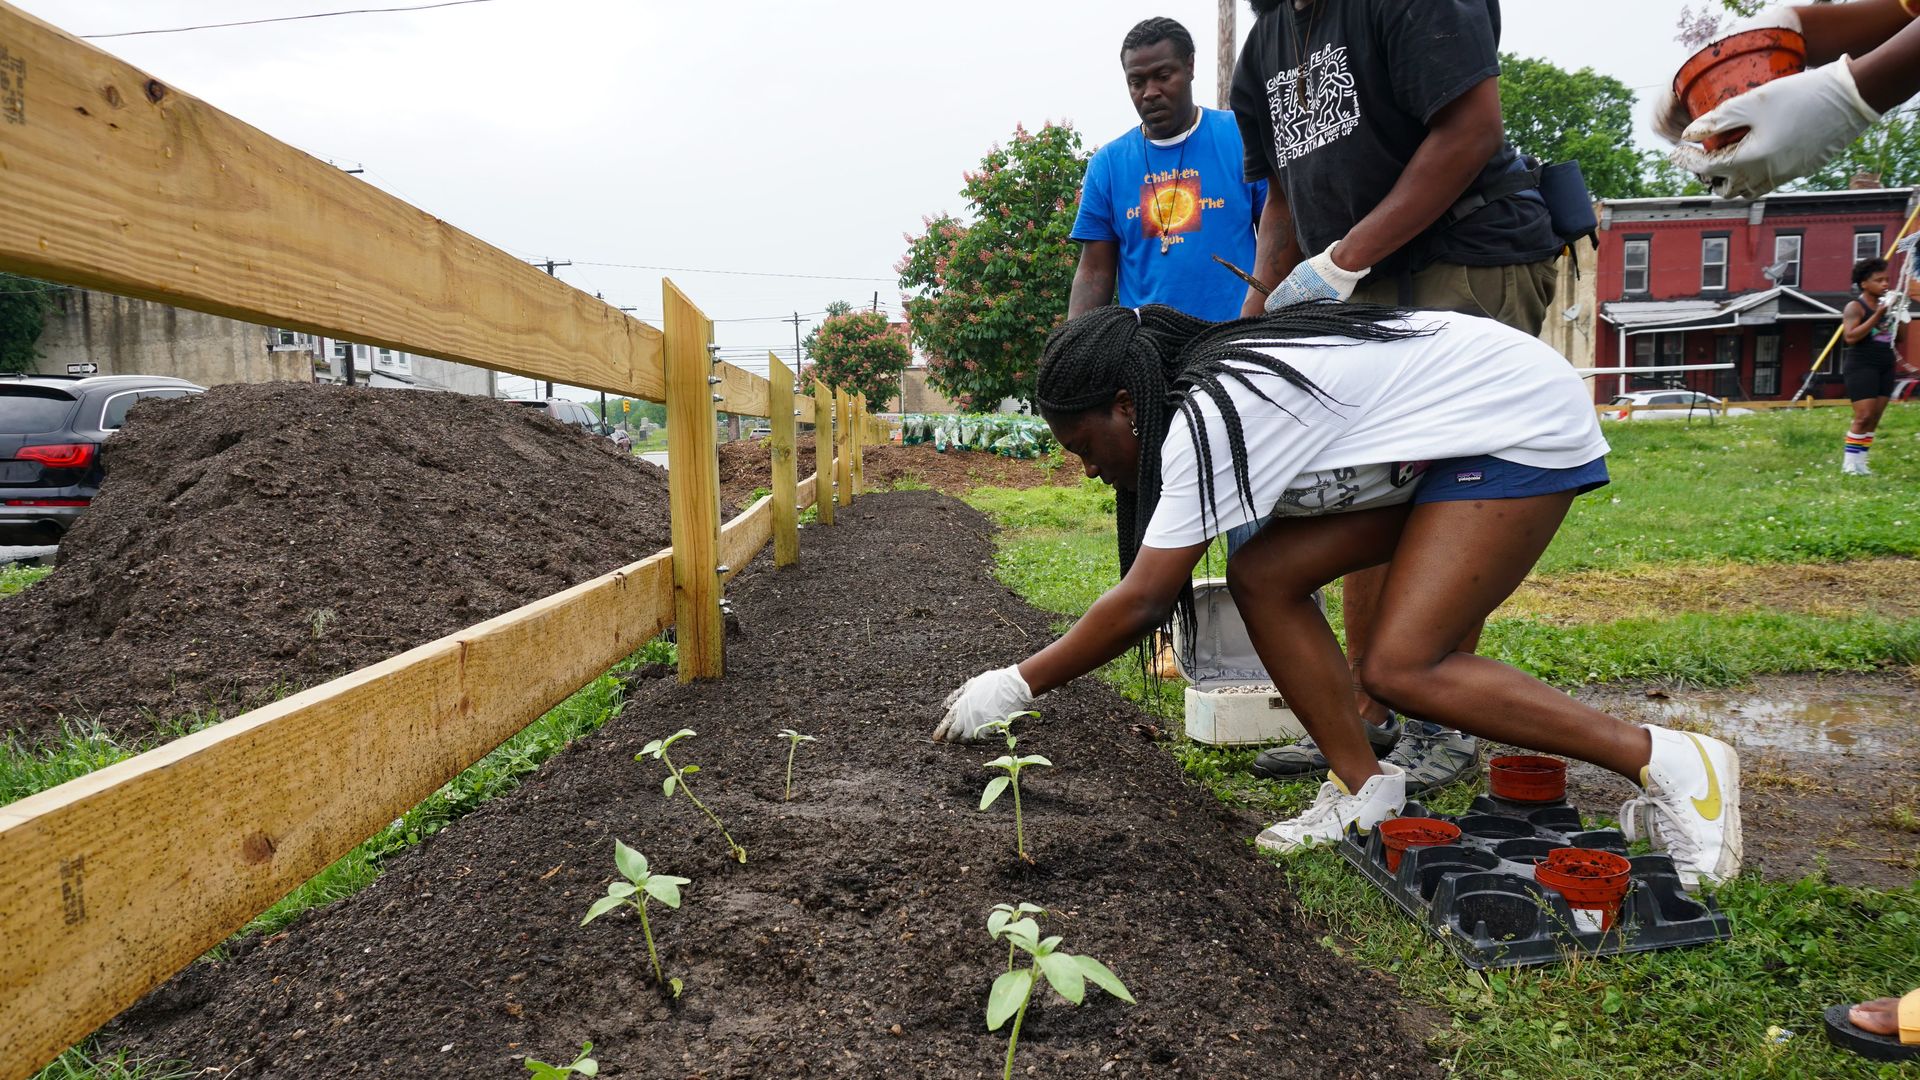 A young girl plants at a community garden in Southwest Philadelphia.